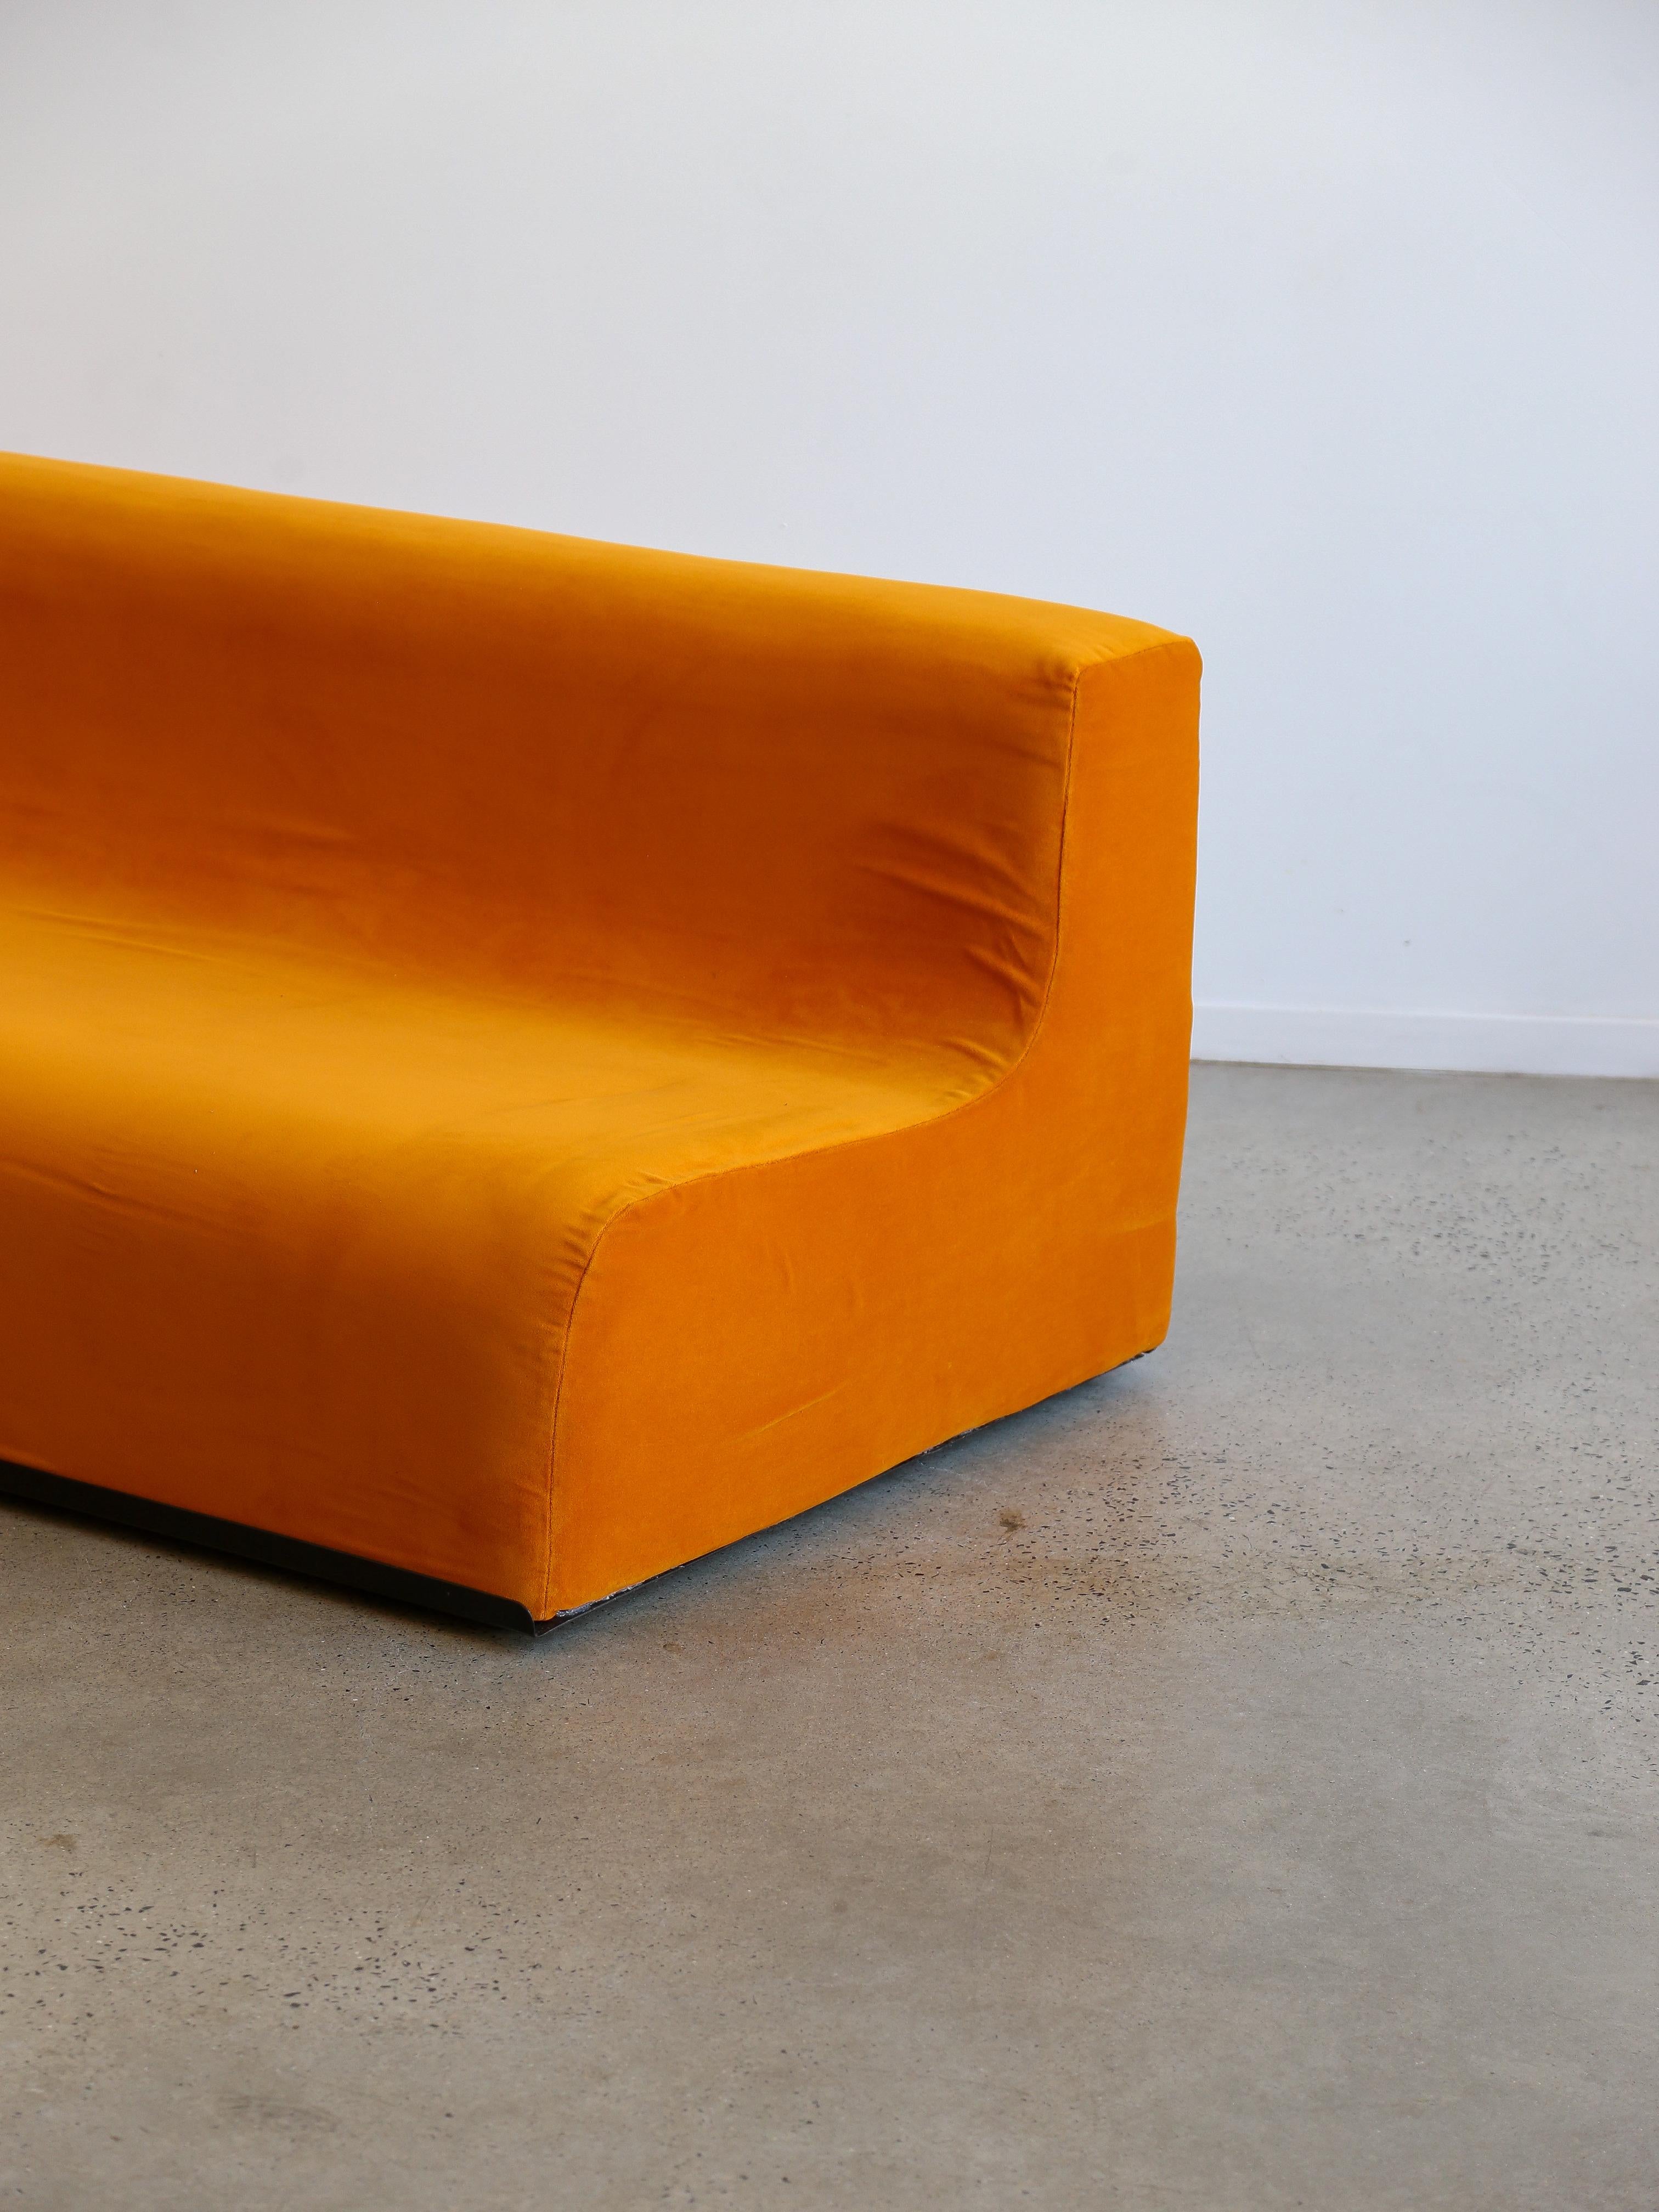 Space age three seater sofa in orange velvet and abs plastic base.

The concept of space-age design and furniture became popular in the mid-20th century, particularly during the mid-20th century space race and the 